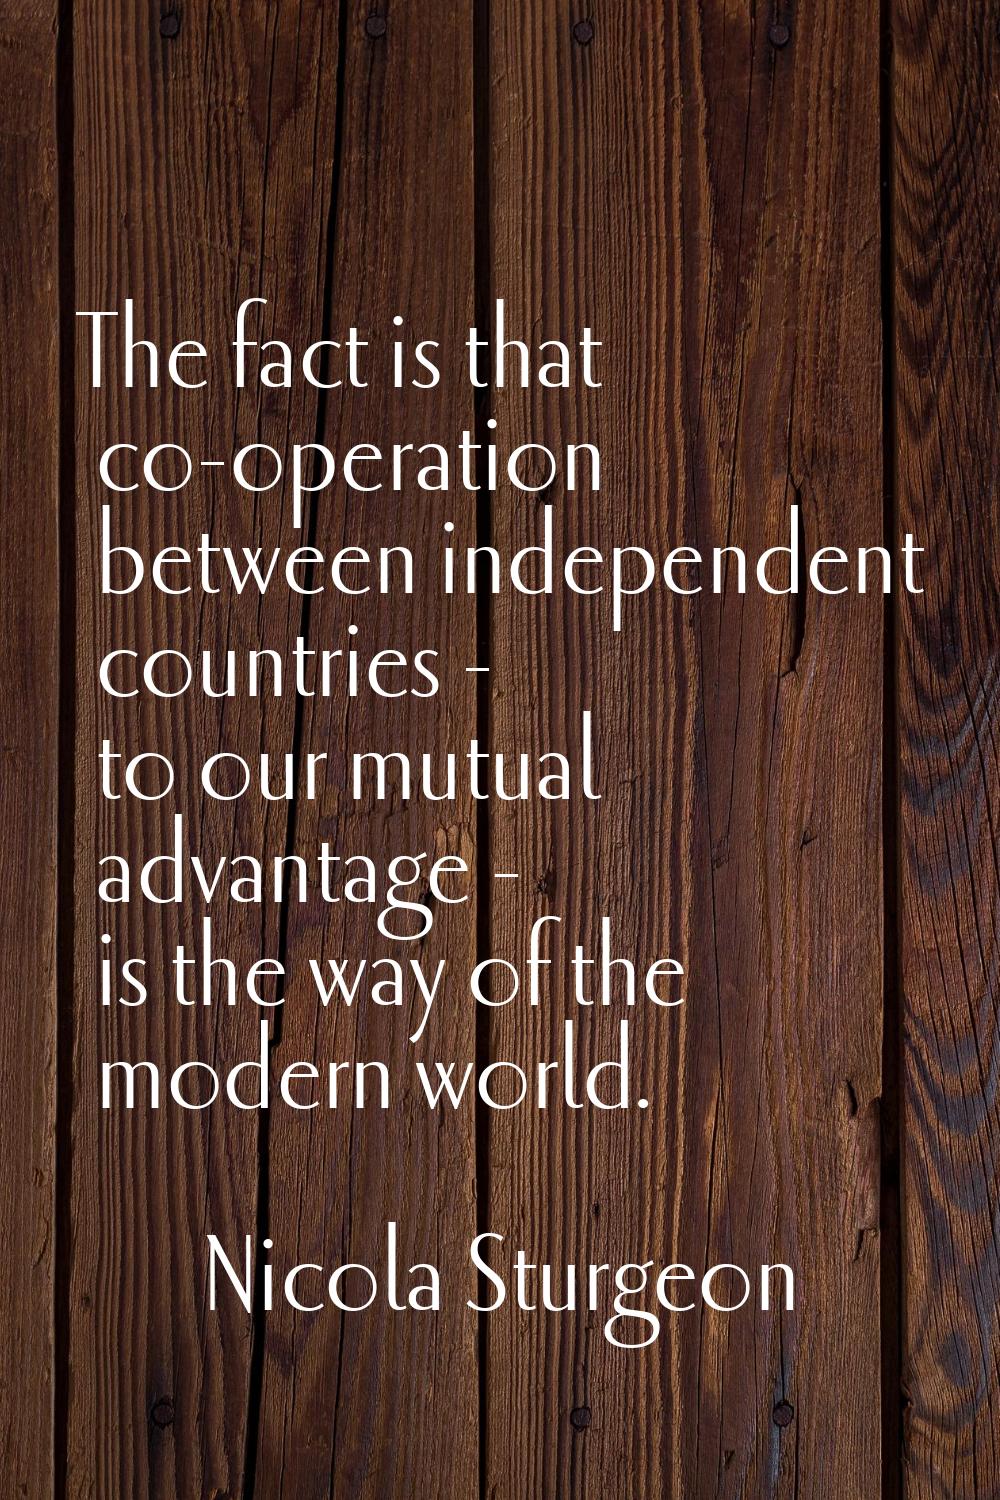 The fact is that co-operation between independent countries - to our mutual advantage - is the way 